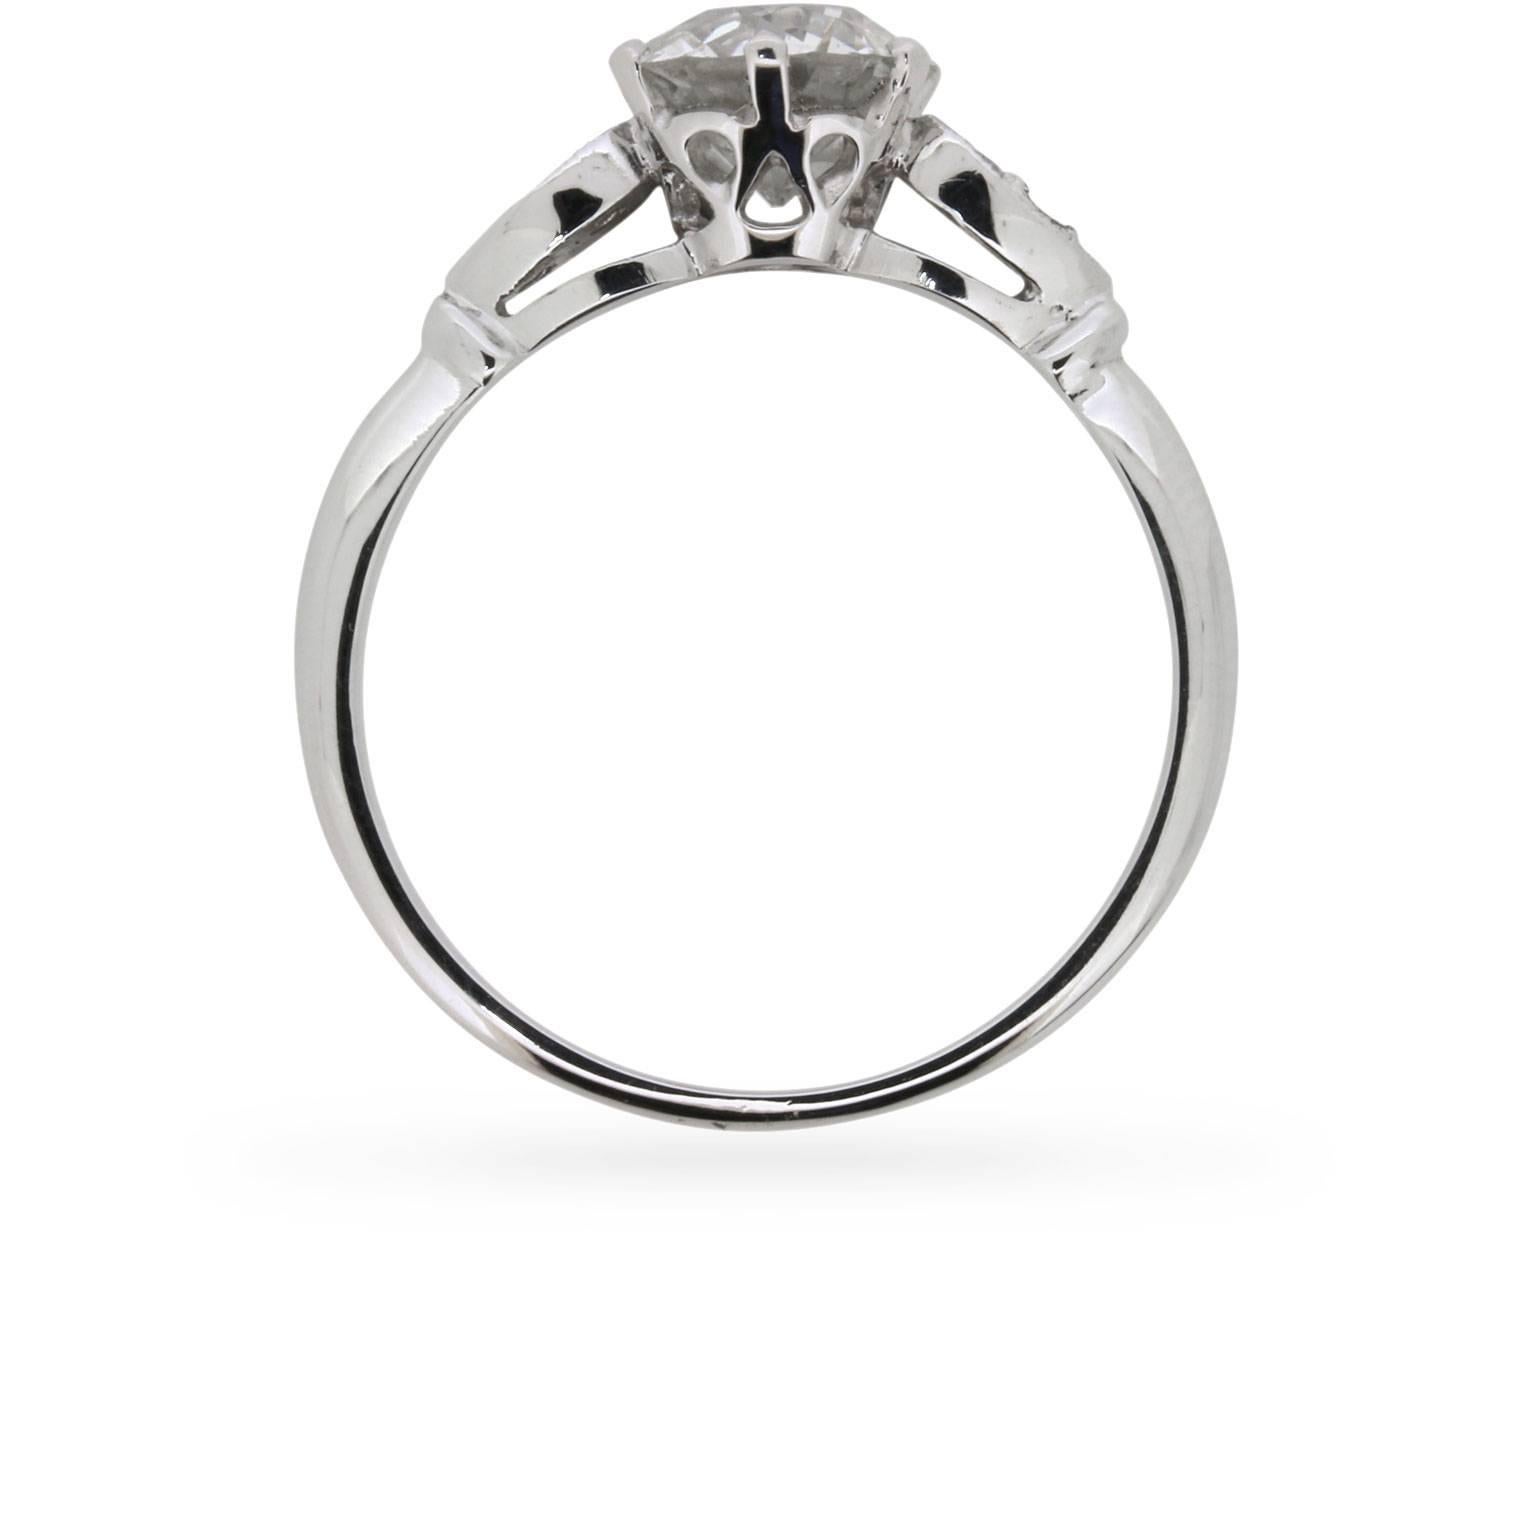 A stunning solitaire ring with eight cuts either side to highlight. The centre stone is 1.22 carat with a colour grade of H and clarity of SI3. The eight cuts total 0.06 carat and are grain set, which compliments the claw set centre stone.

The